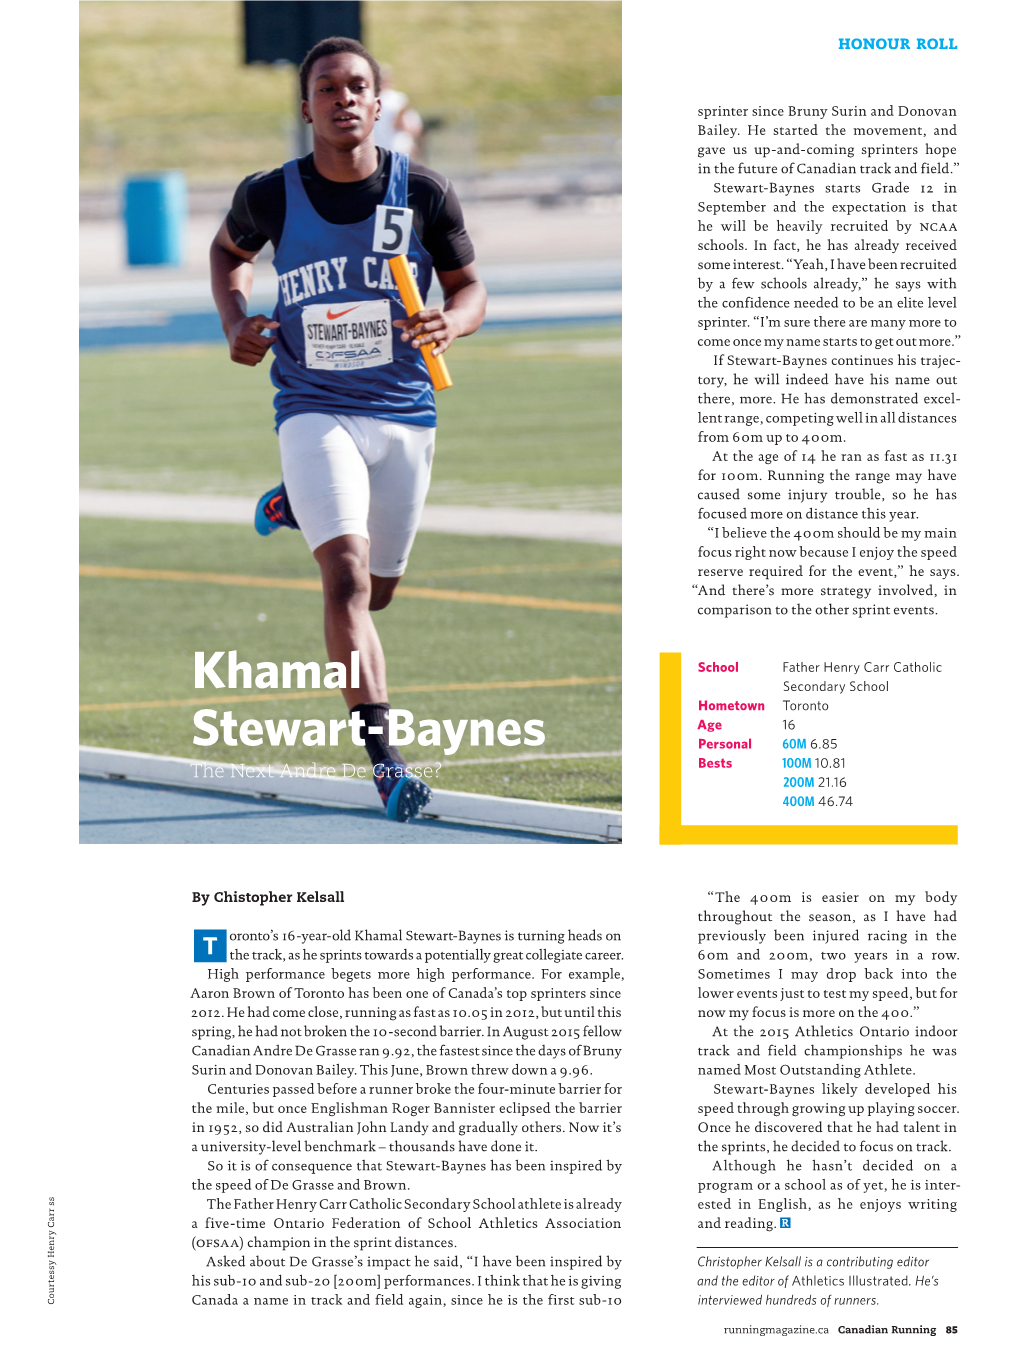 Khamal Stewart-Baynes Is Turning Heads on Previously Been Injured Racing in the Tthe Track, As He Sprints Towards a Potentially Great Collegiate Career